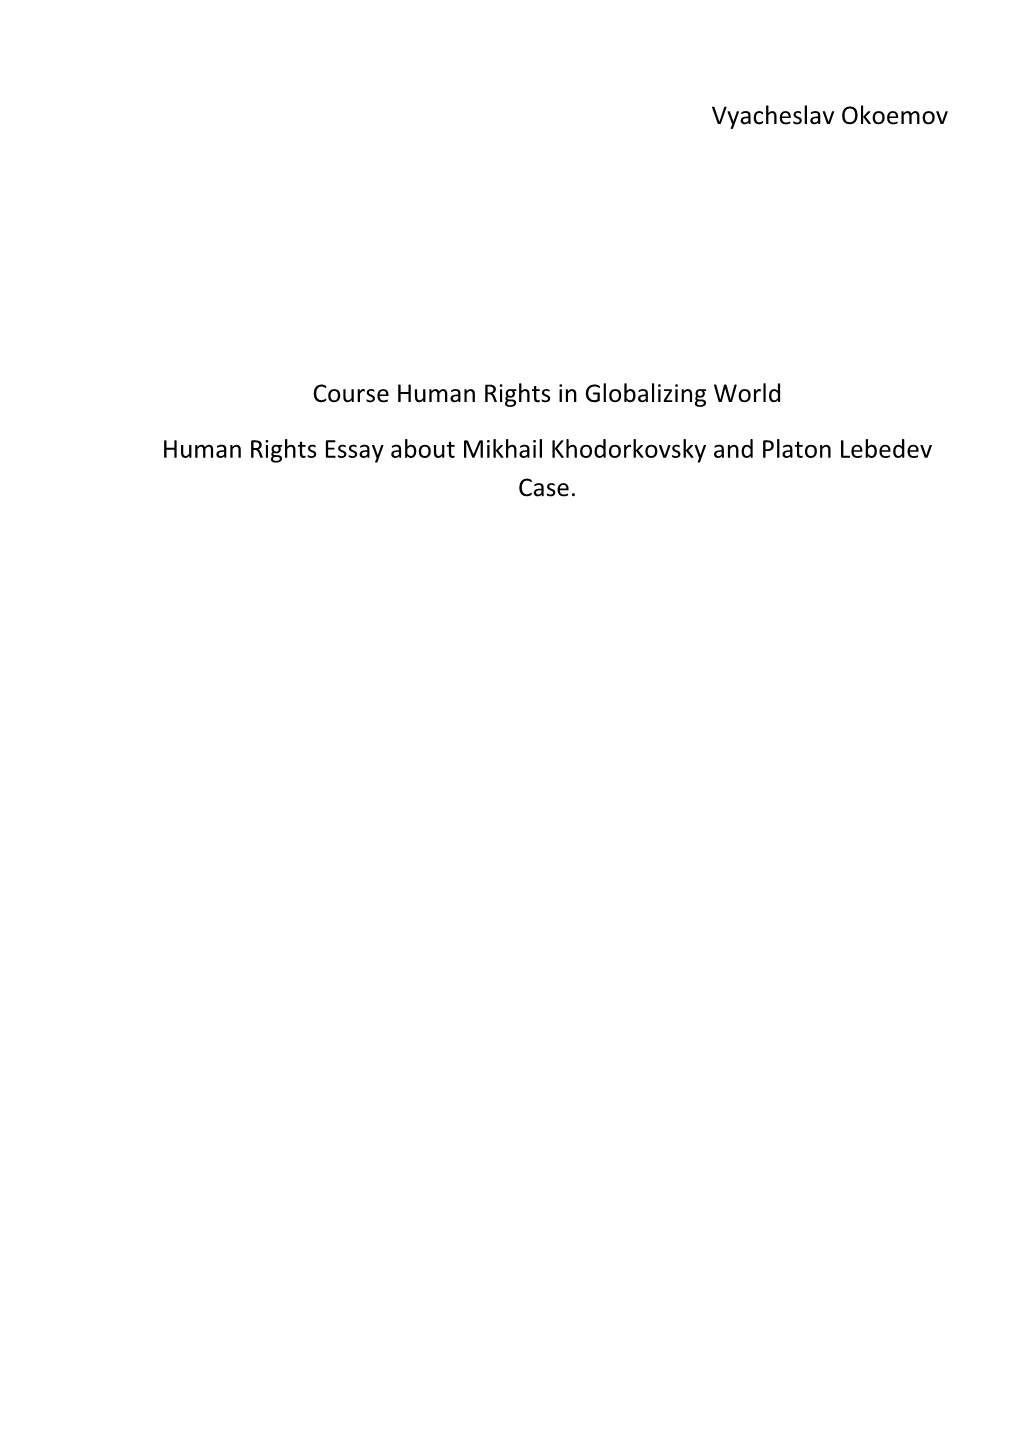 Course Human Rights in Globalizing World